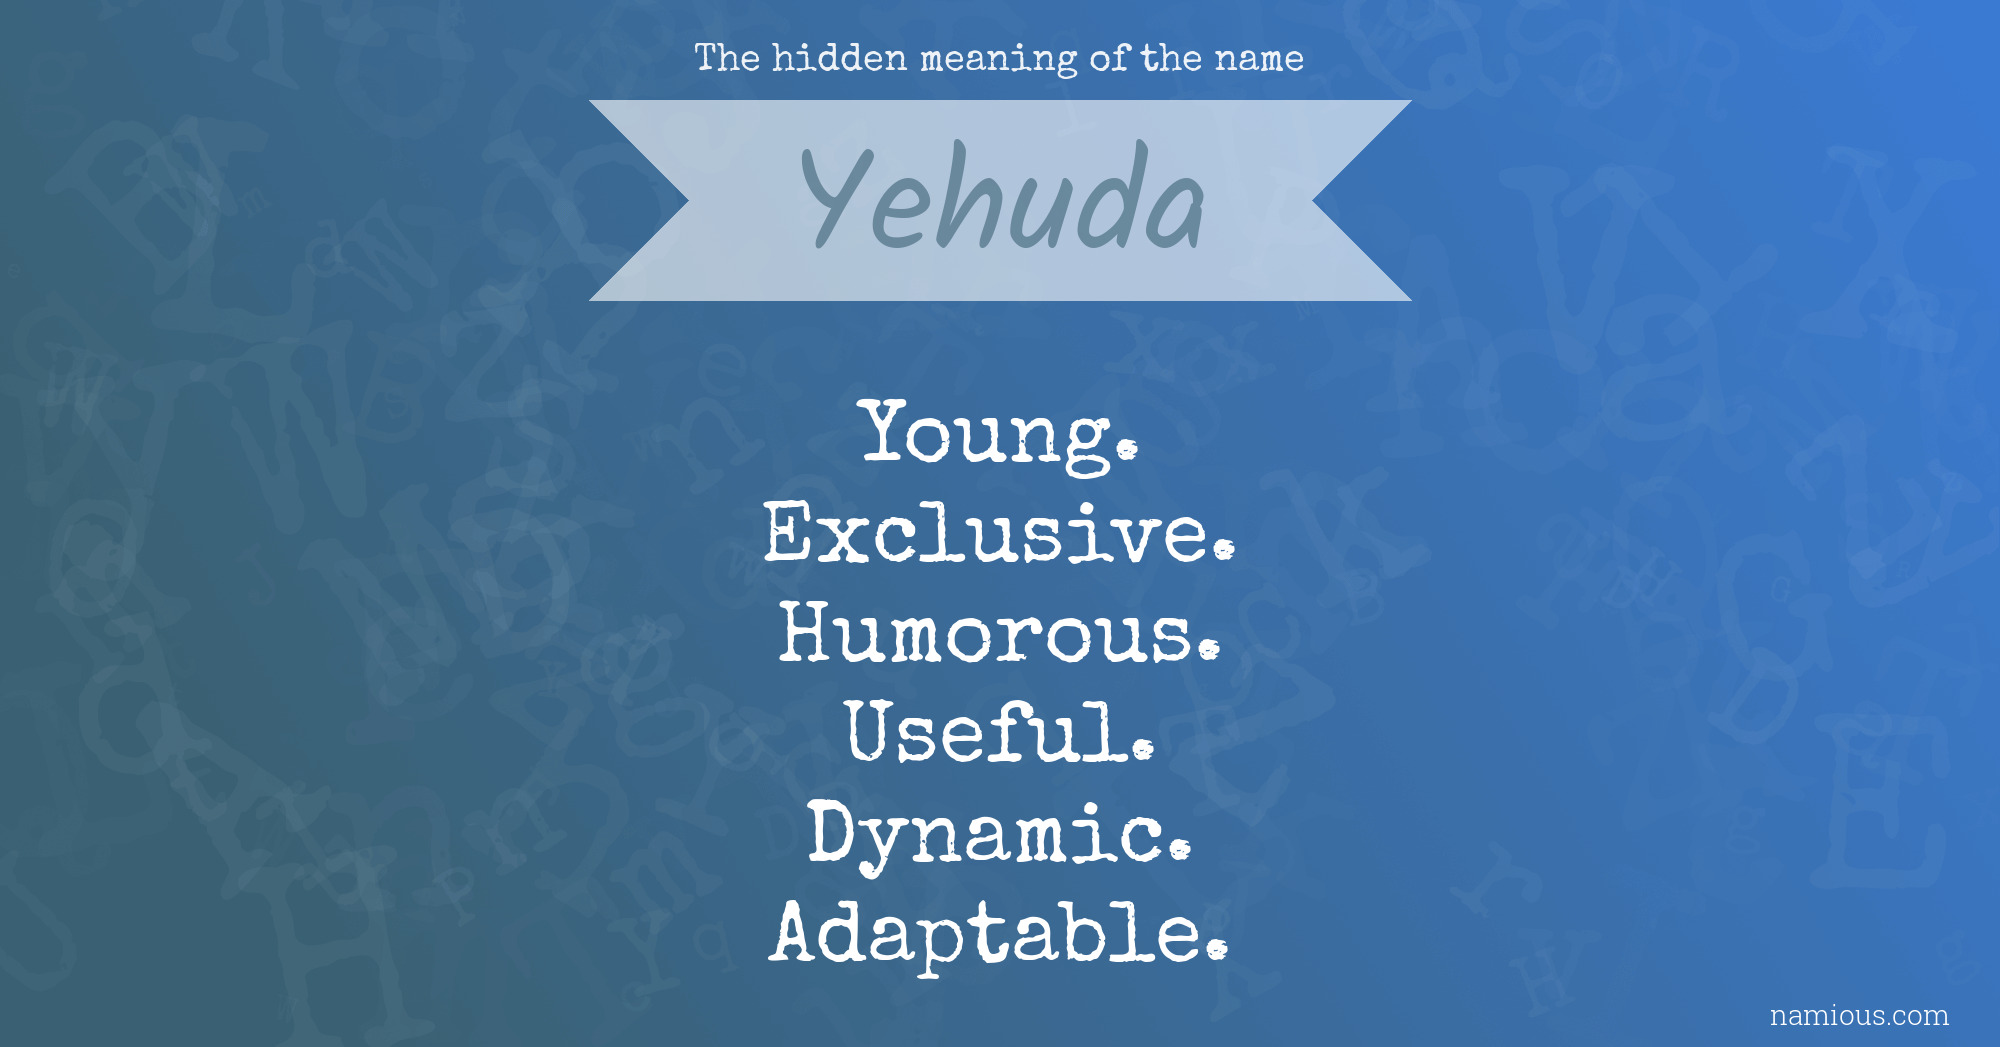 The hidden meaning of the name Yehuda